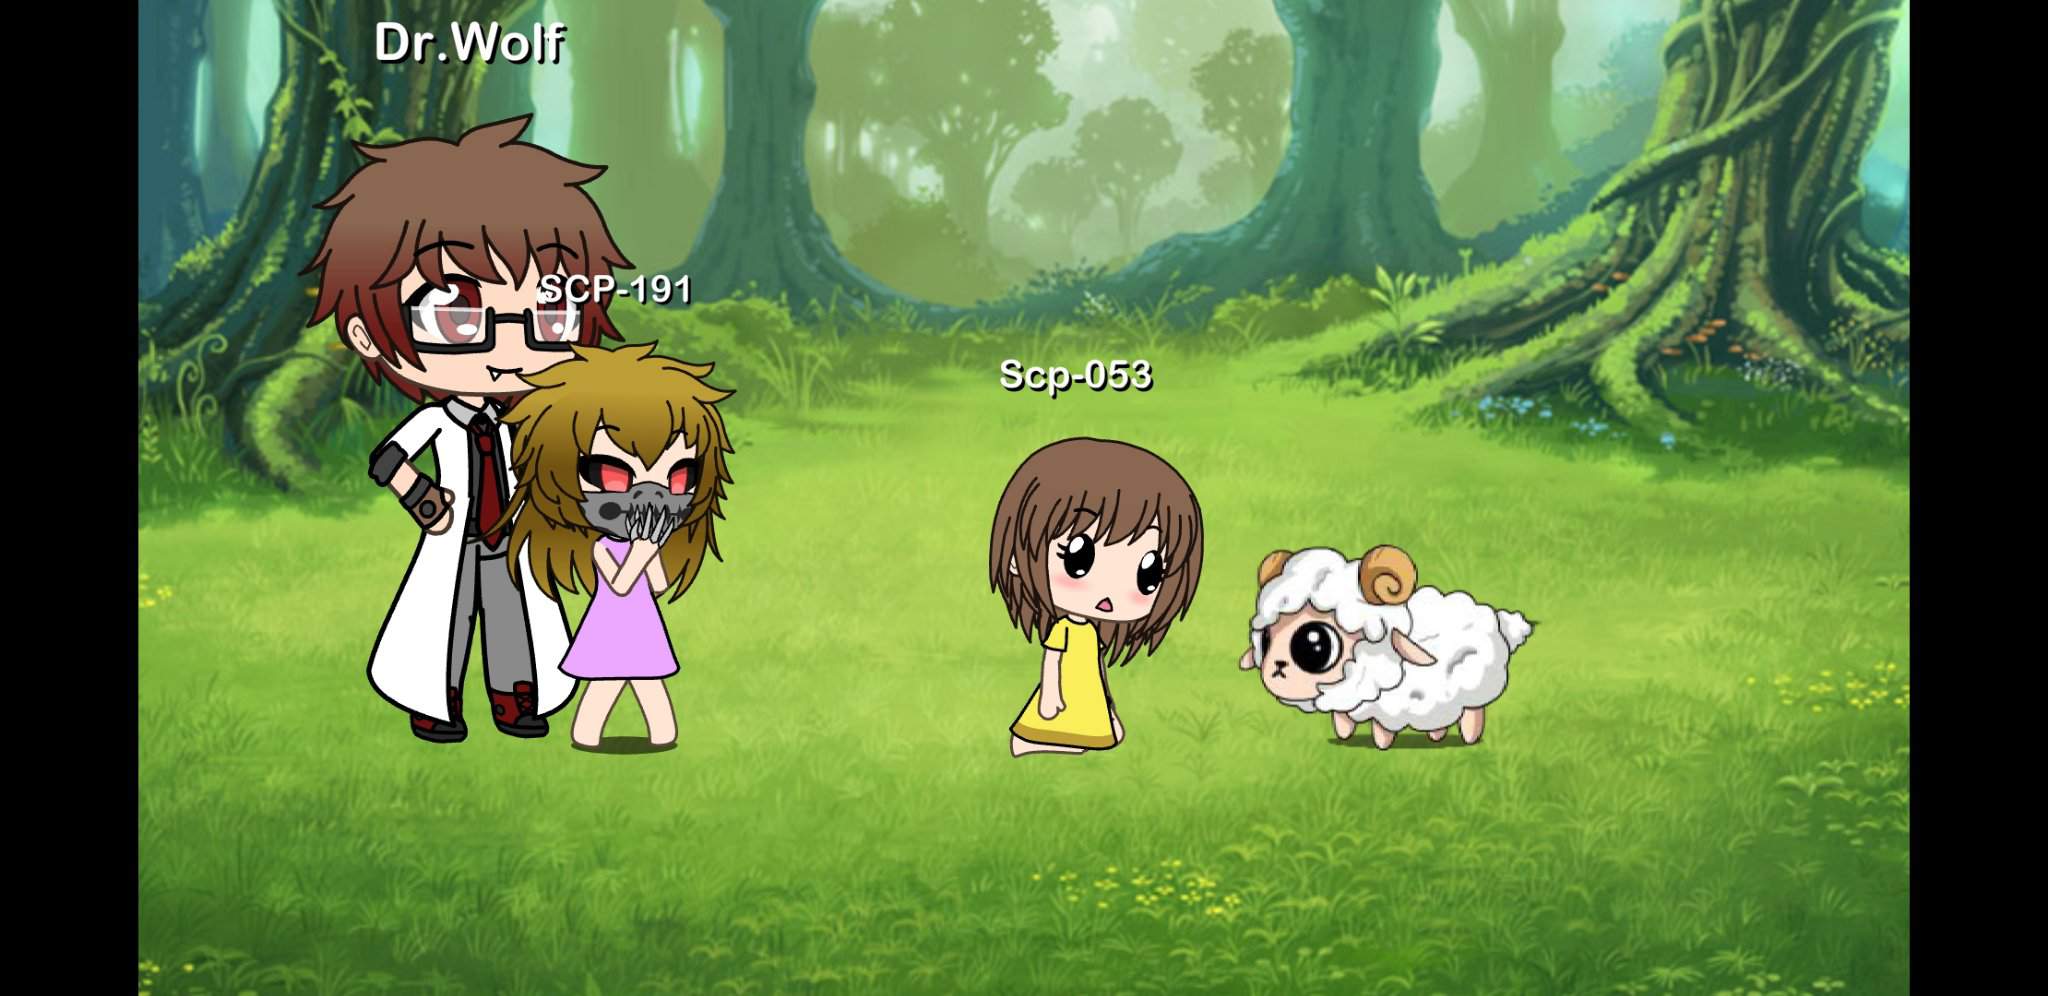 Took Scp 053 And Scp 191 Outside Today 053 And 191 Saw A Sheep 053 Though It Was Cute While 191 Was Scared Of It End Log Gacha Life Amino Create your own anime styled characters and dress them up in your favorite fashion choose from over a hundred backgrounds to create the perfect story! amino